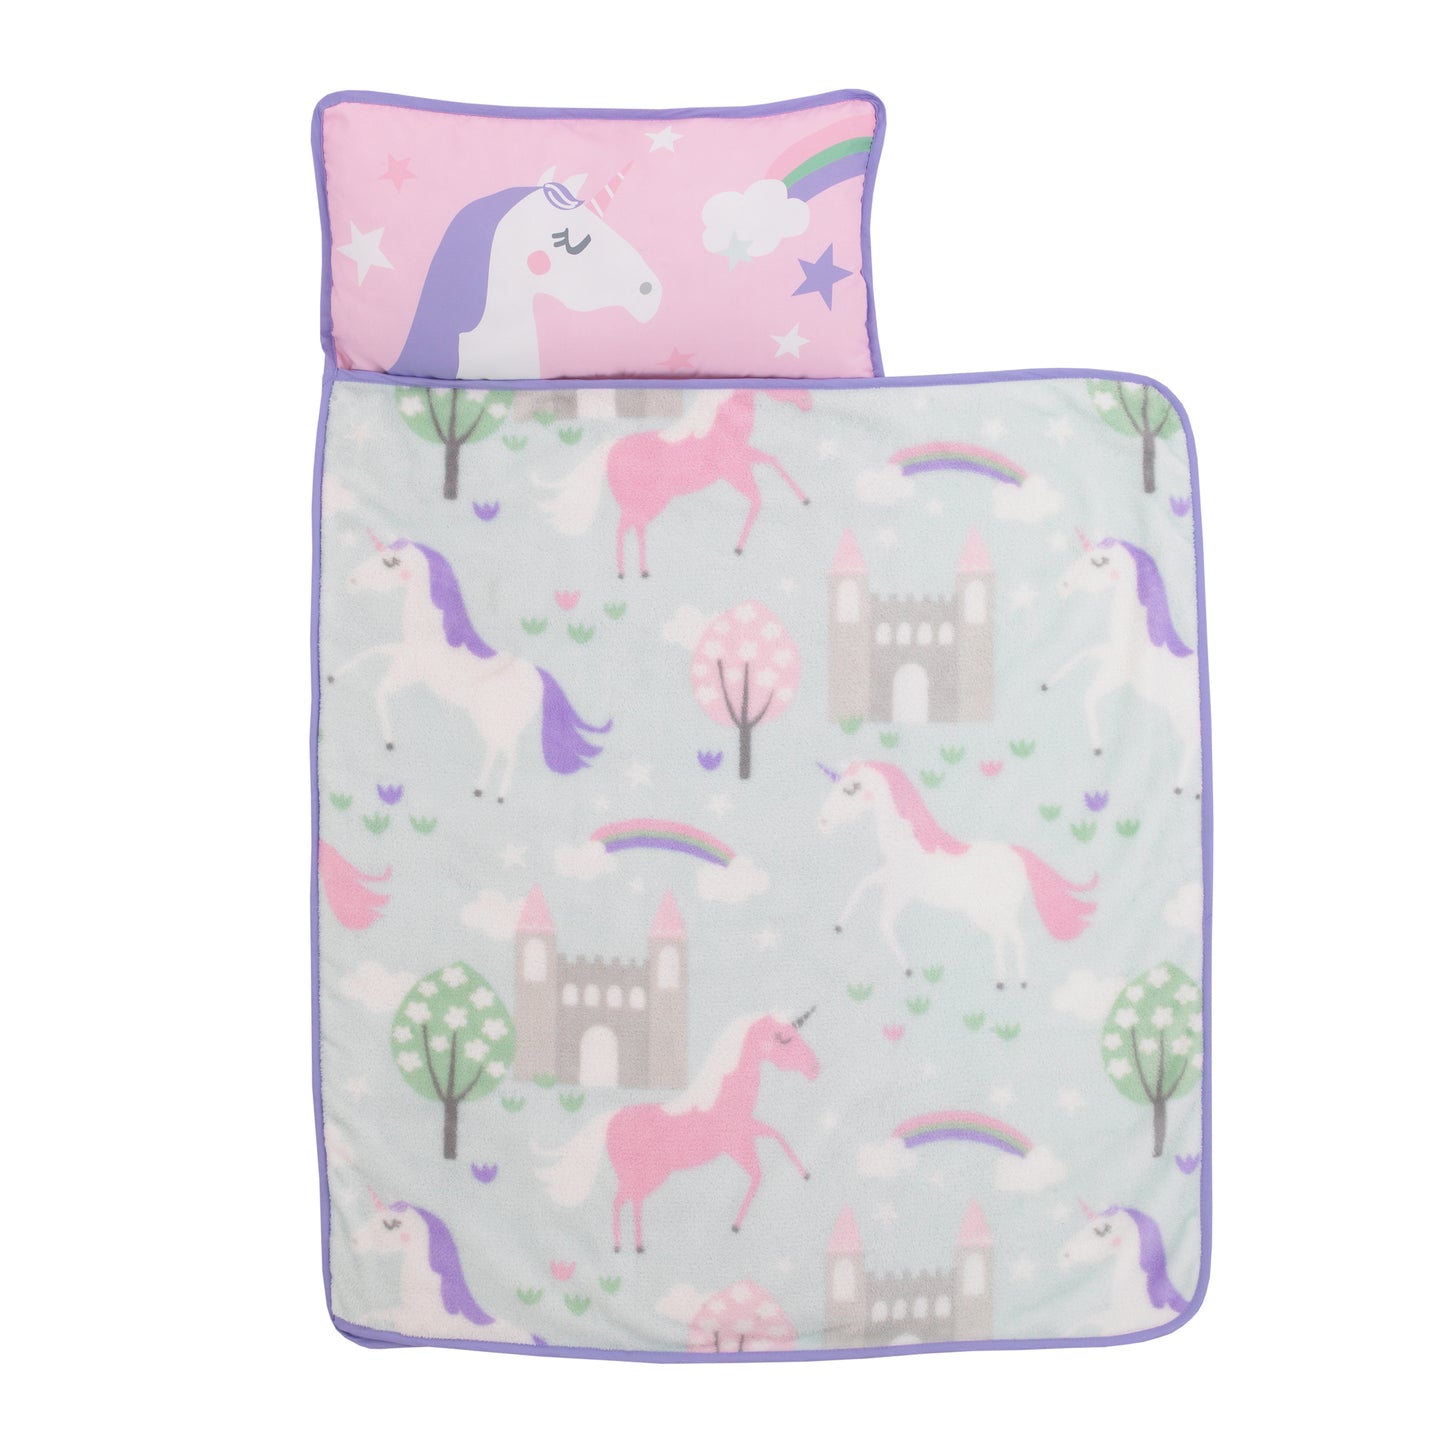 Everything Kids Pink and Aqua Unicorn Toddler Nap Mat with Pillow and Blanket